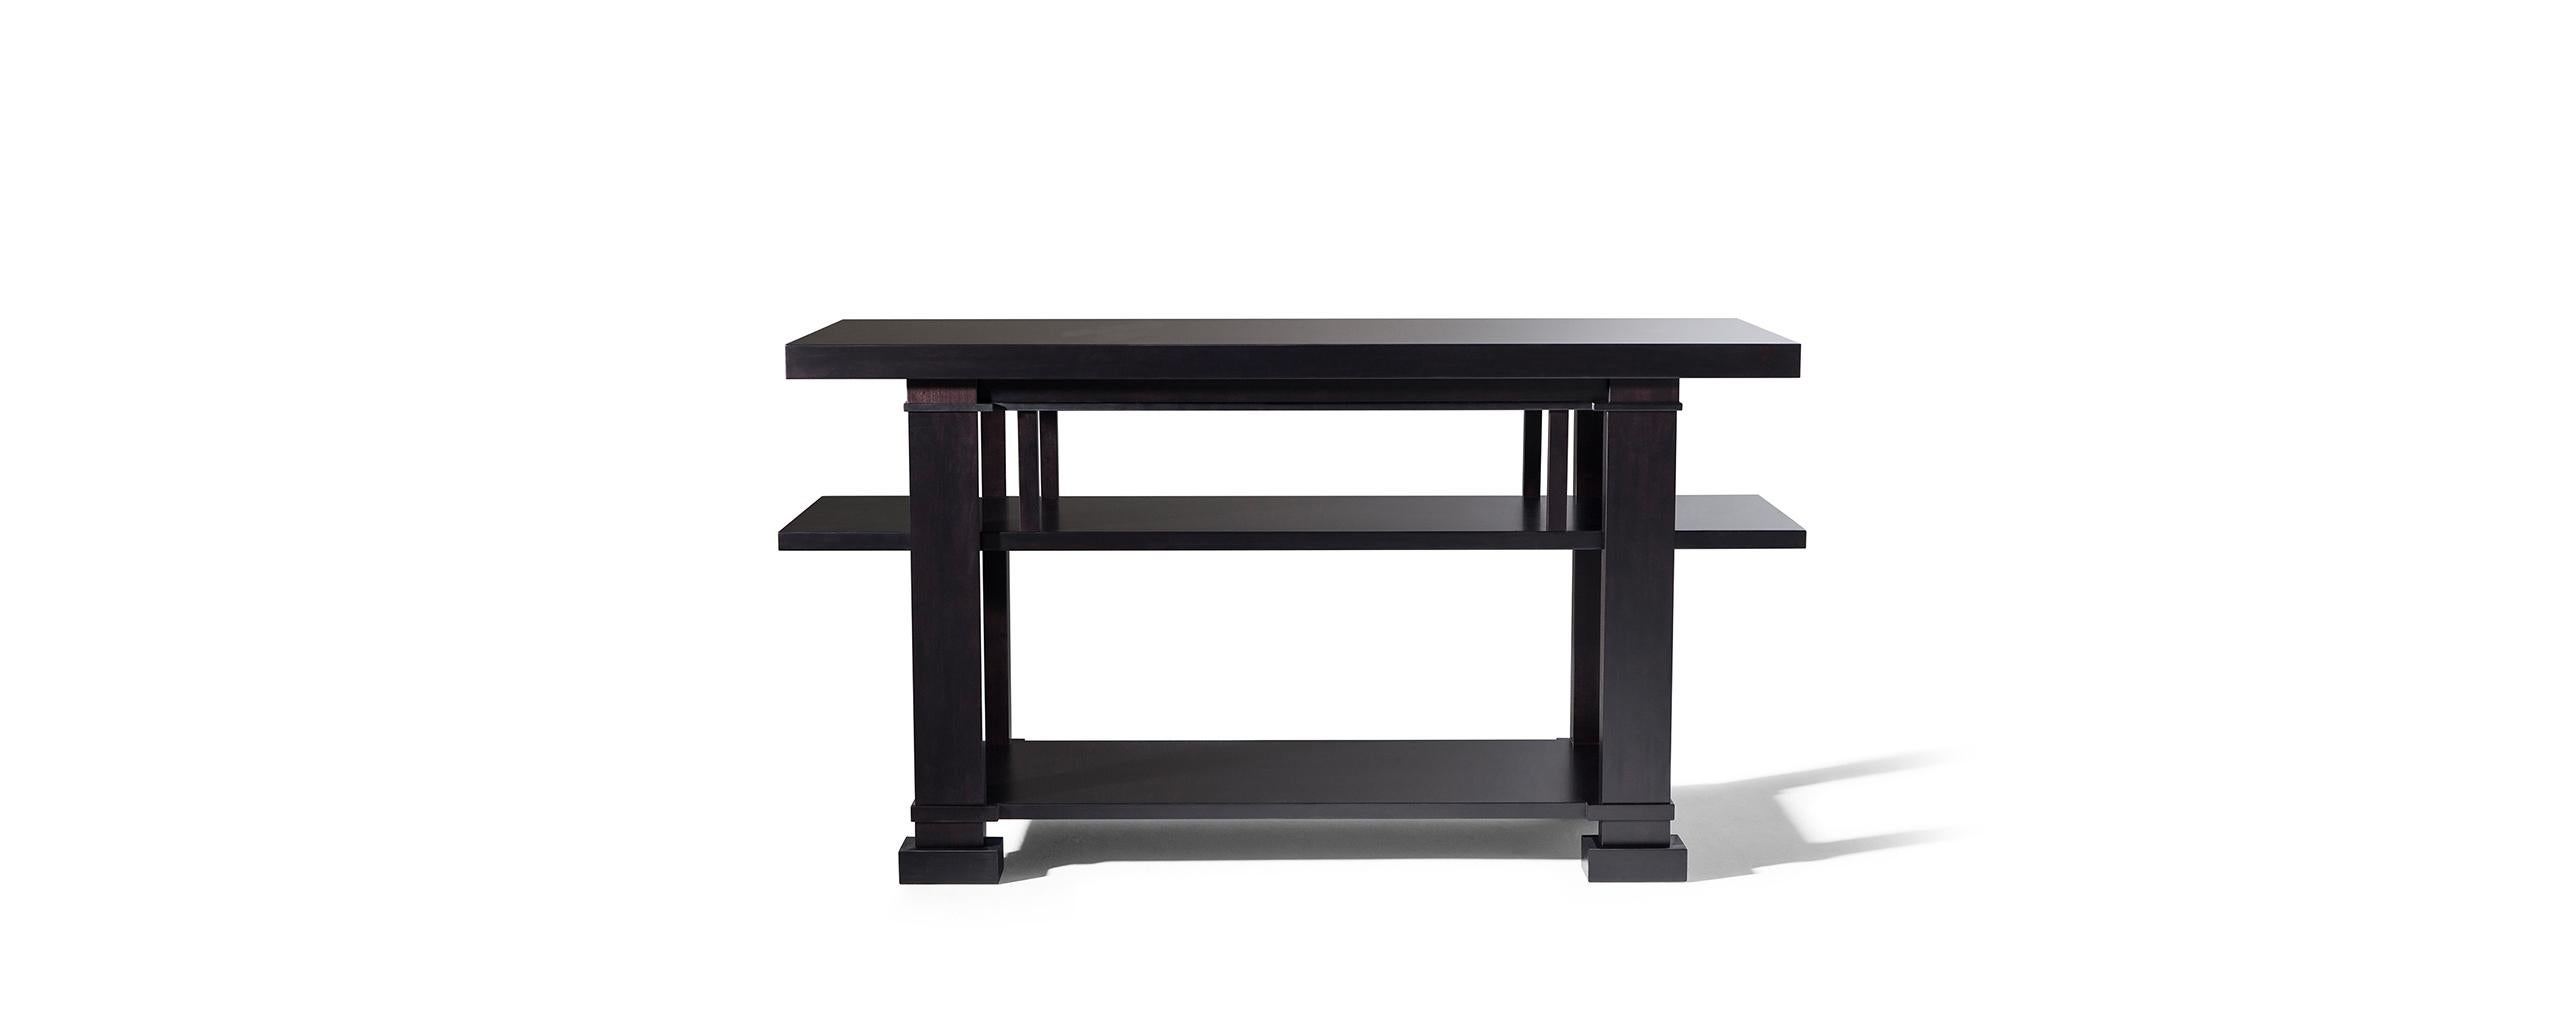 Table designed by Frank Lloyd Wright in 1907, relaunched in 1992.
Manufactured by Cassina in Italy.

This table was originally conceived as a sideboard for the dining room of Boynton Hall in Rochester, New York, which Frank Lloyd Wright designed in